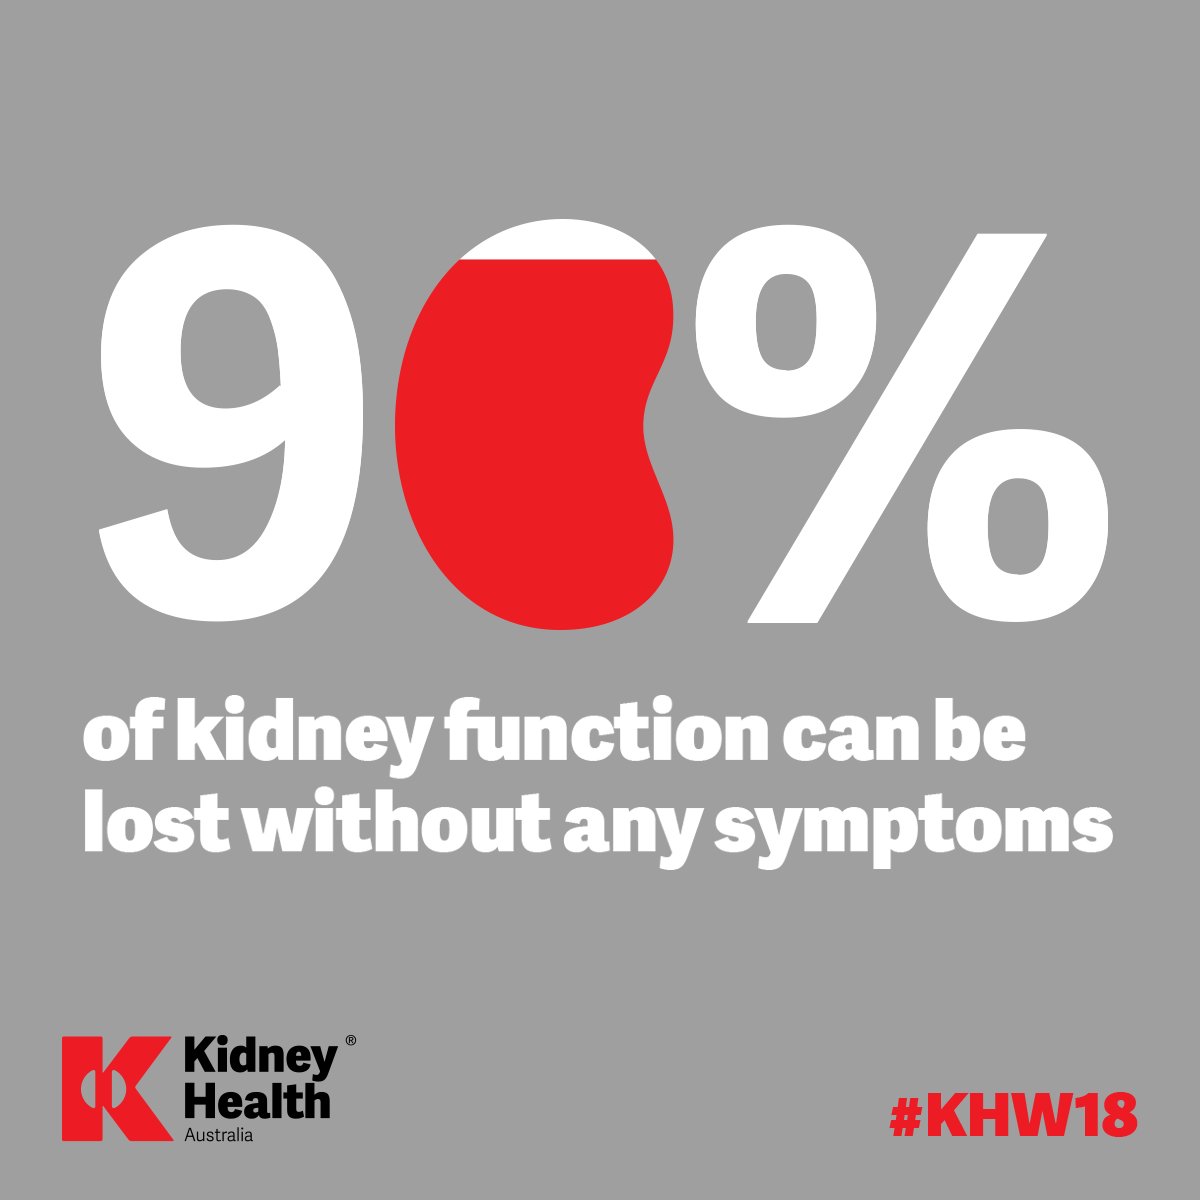 It’s #KHW18 & @KidneyHealth Australia wants you to find out if you’re the 1 in 3 at risk. Don’t be blind to kidney disease by waiting until you feel sick. Take the #KidneyRiskTest goo.gl/7TZgw3